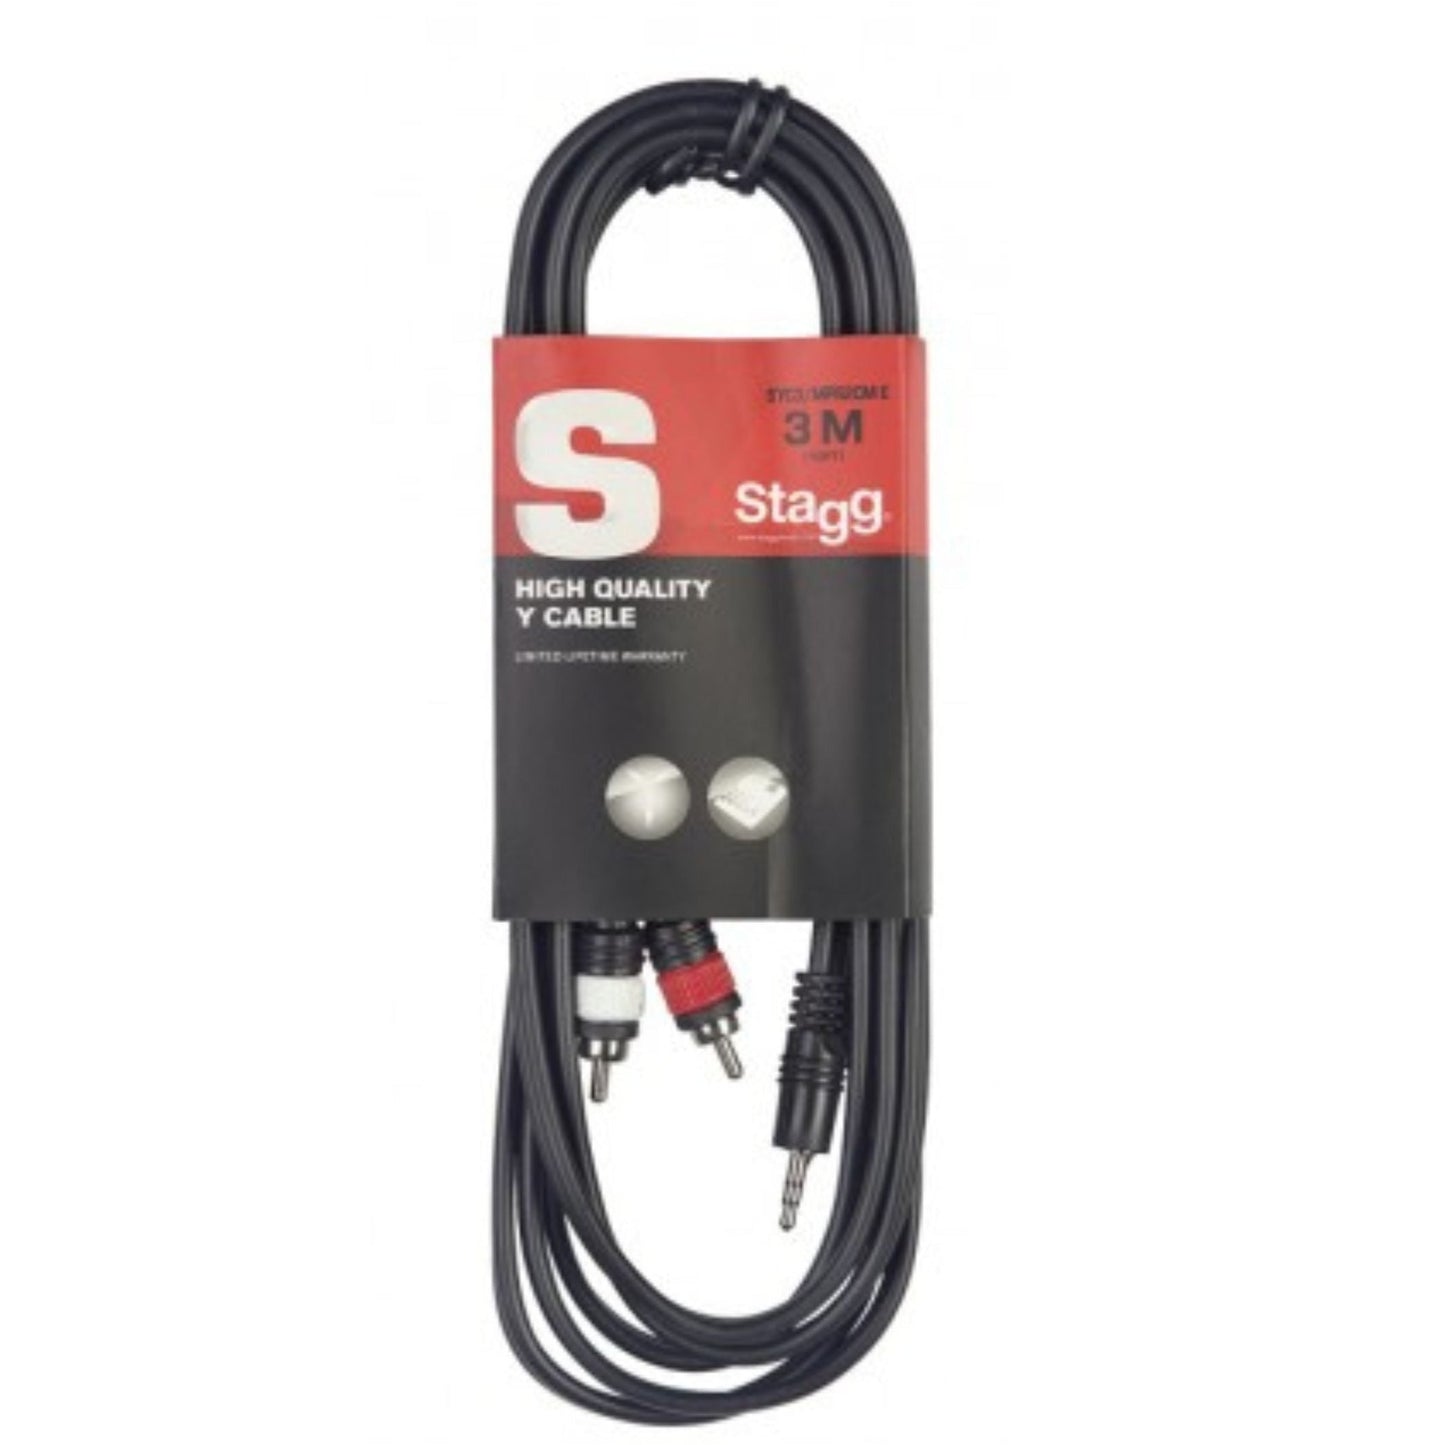 Stagg High Quality Y Cable 3M Mini Jack to Phono